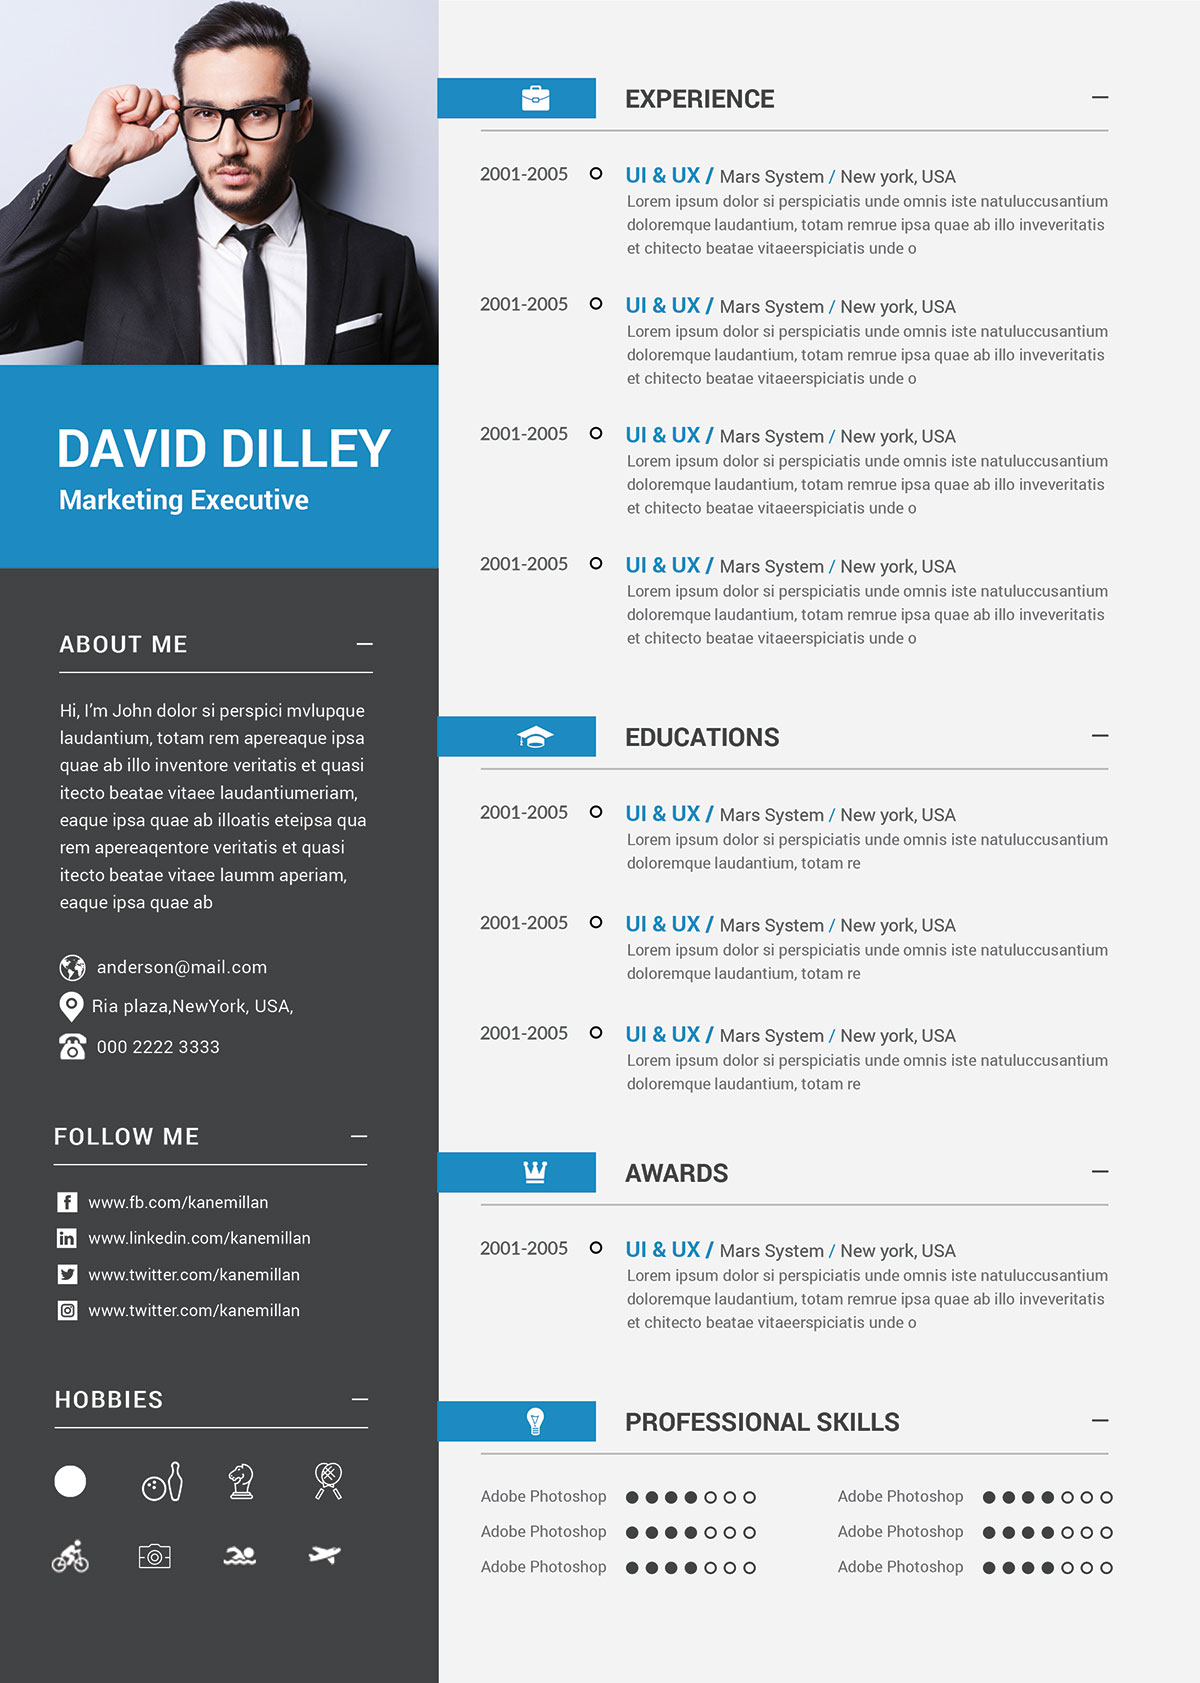 Free Professional CV Template & Cover Letter for Marketing